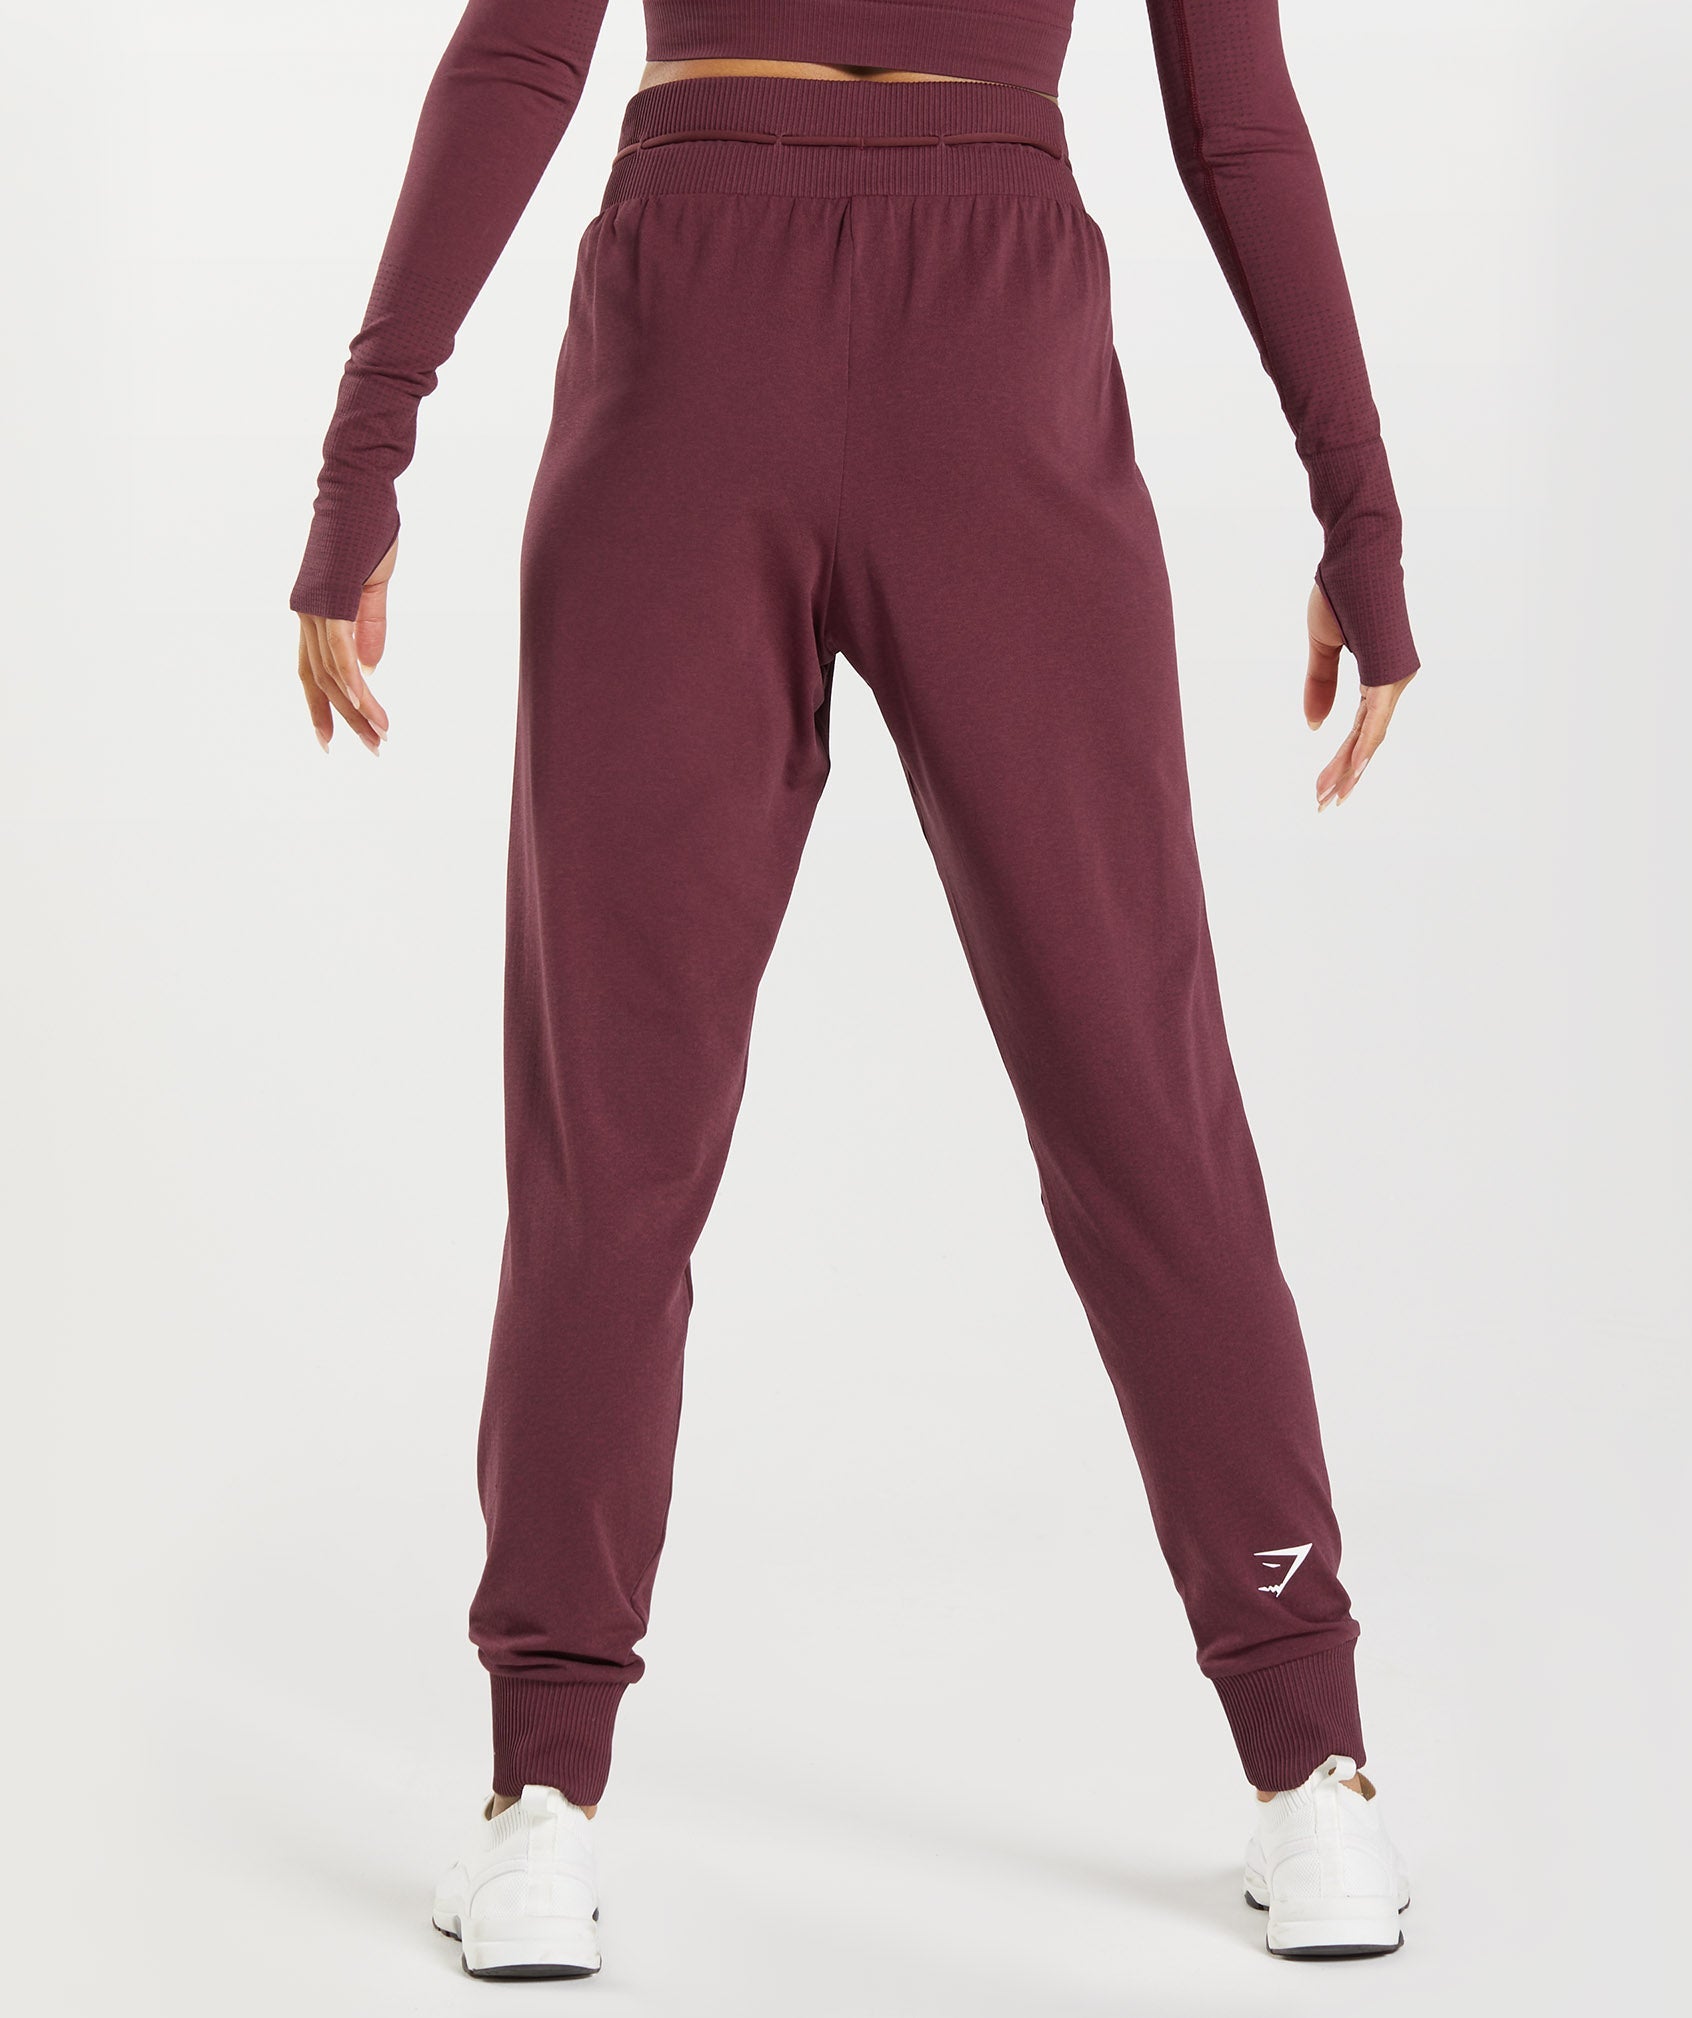 Vital Seamless 2.0 Joggers in Baked Maroon Marl - view 2